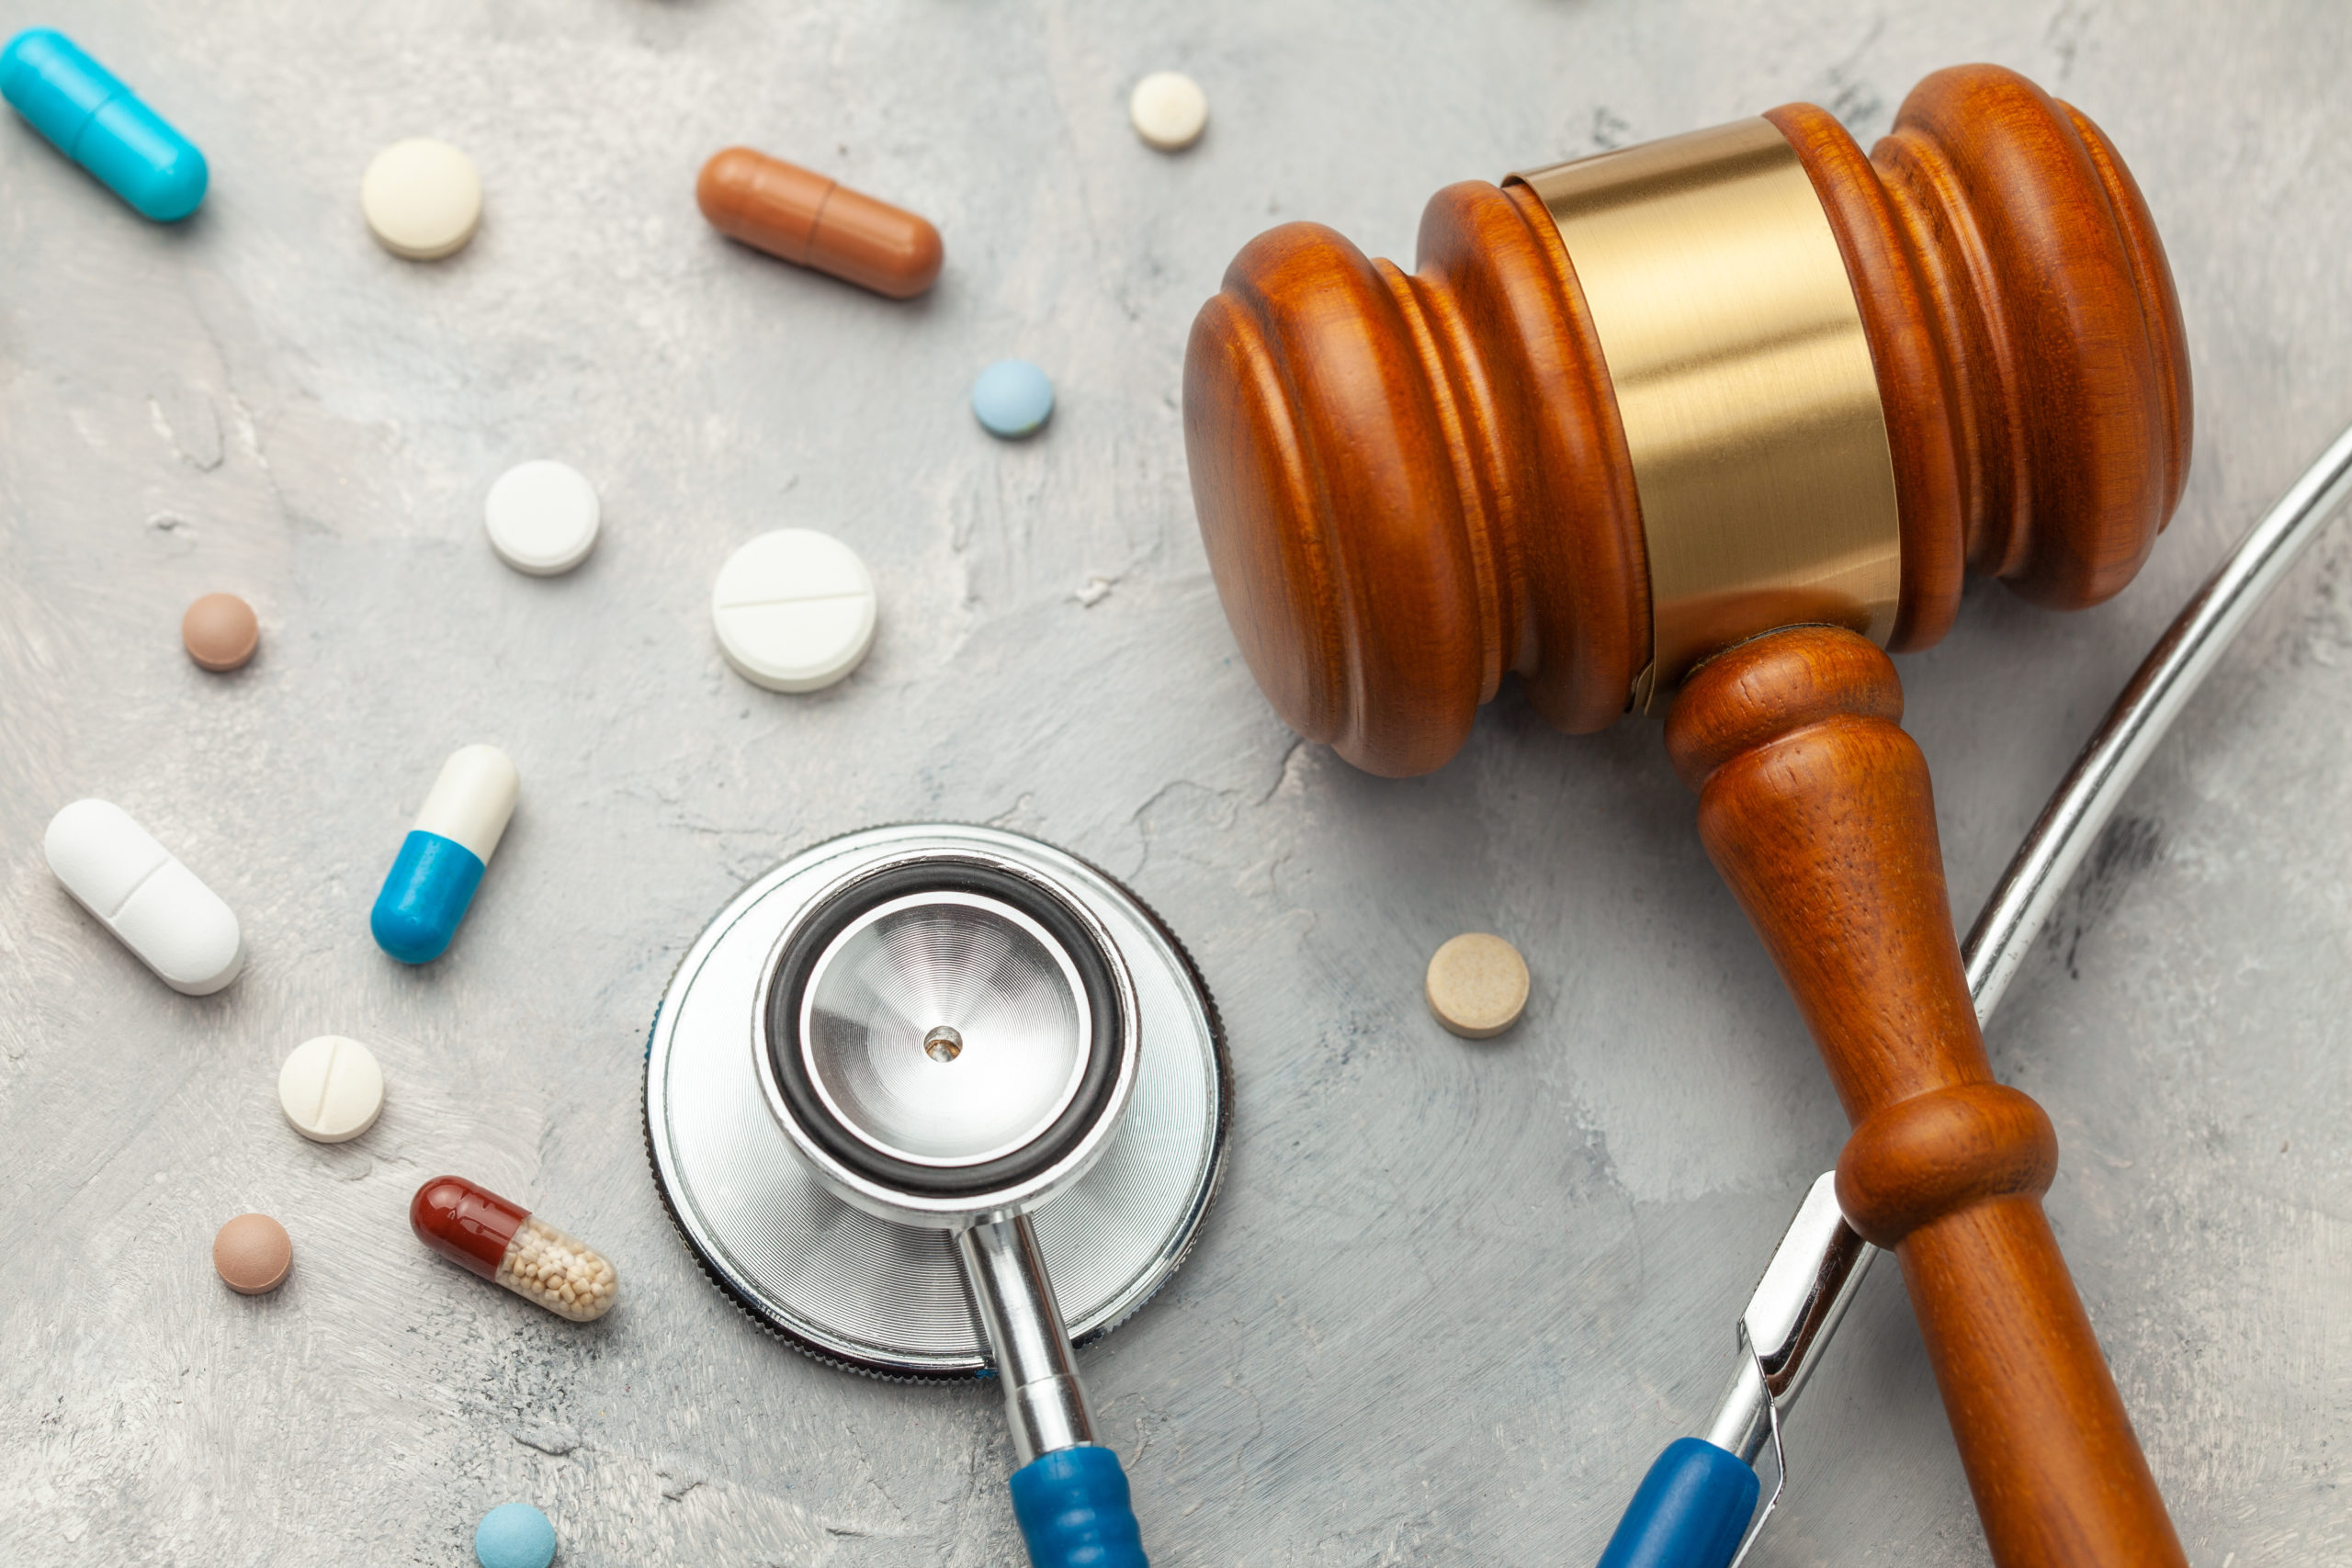 Has the Supreme Court Opened a Door for New Challenges to State Corporate Practice of Medicine Laws?